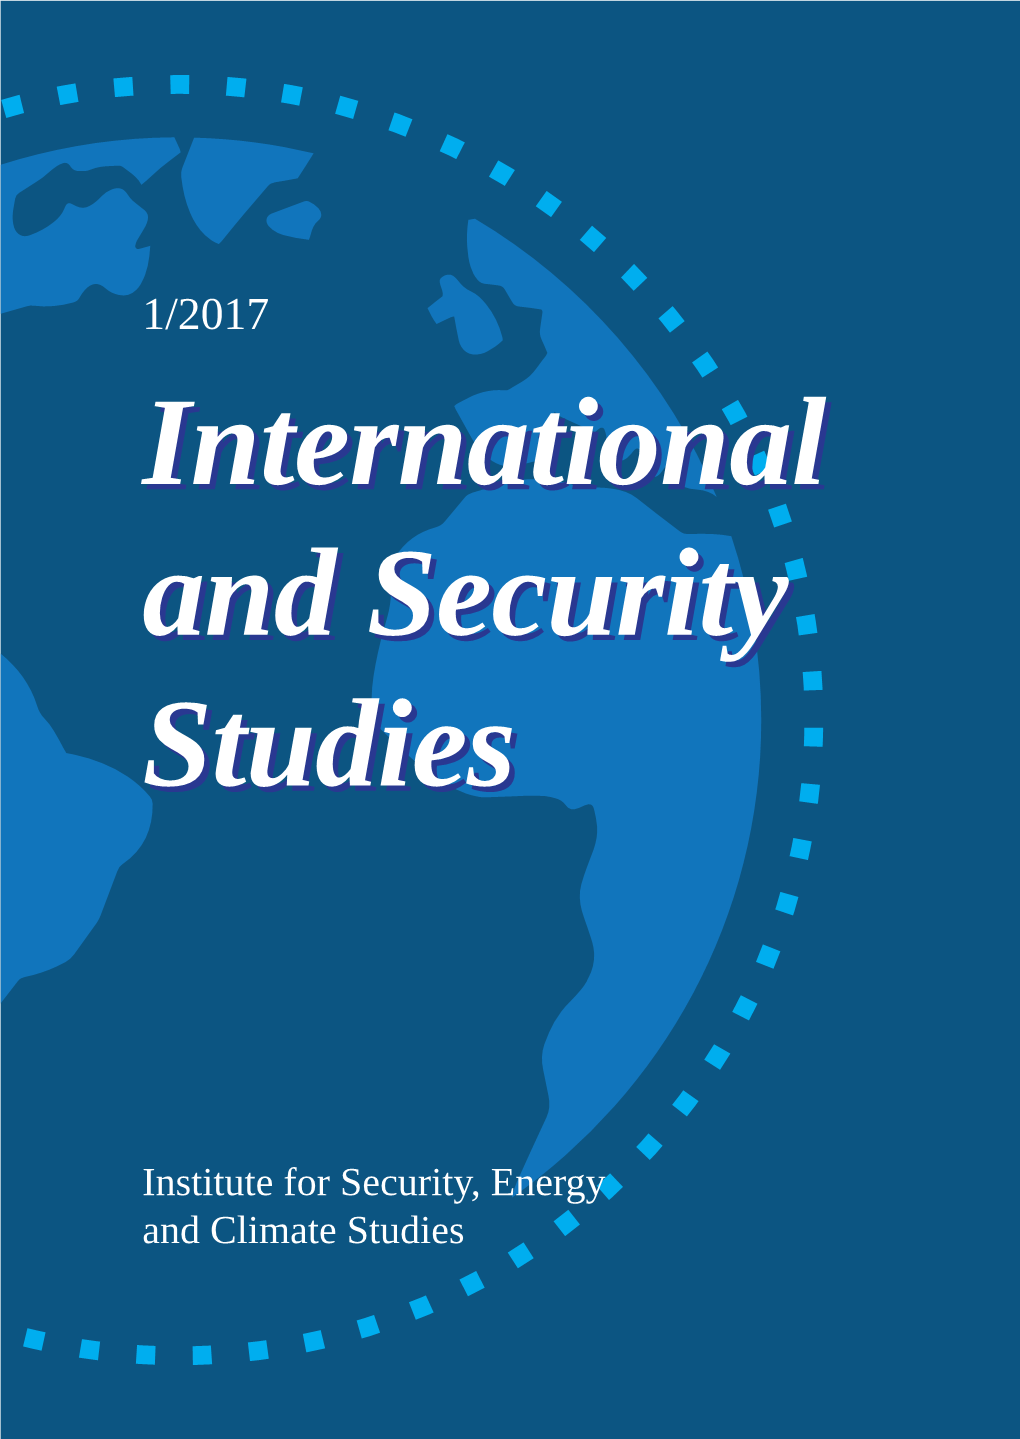 INTERNATIONAL and SECURITY STUDIES Internationalinternational Andand Securitysecurity Studiesstudies